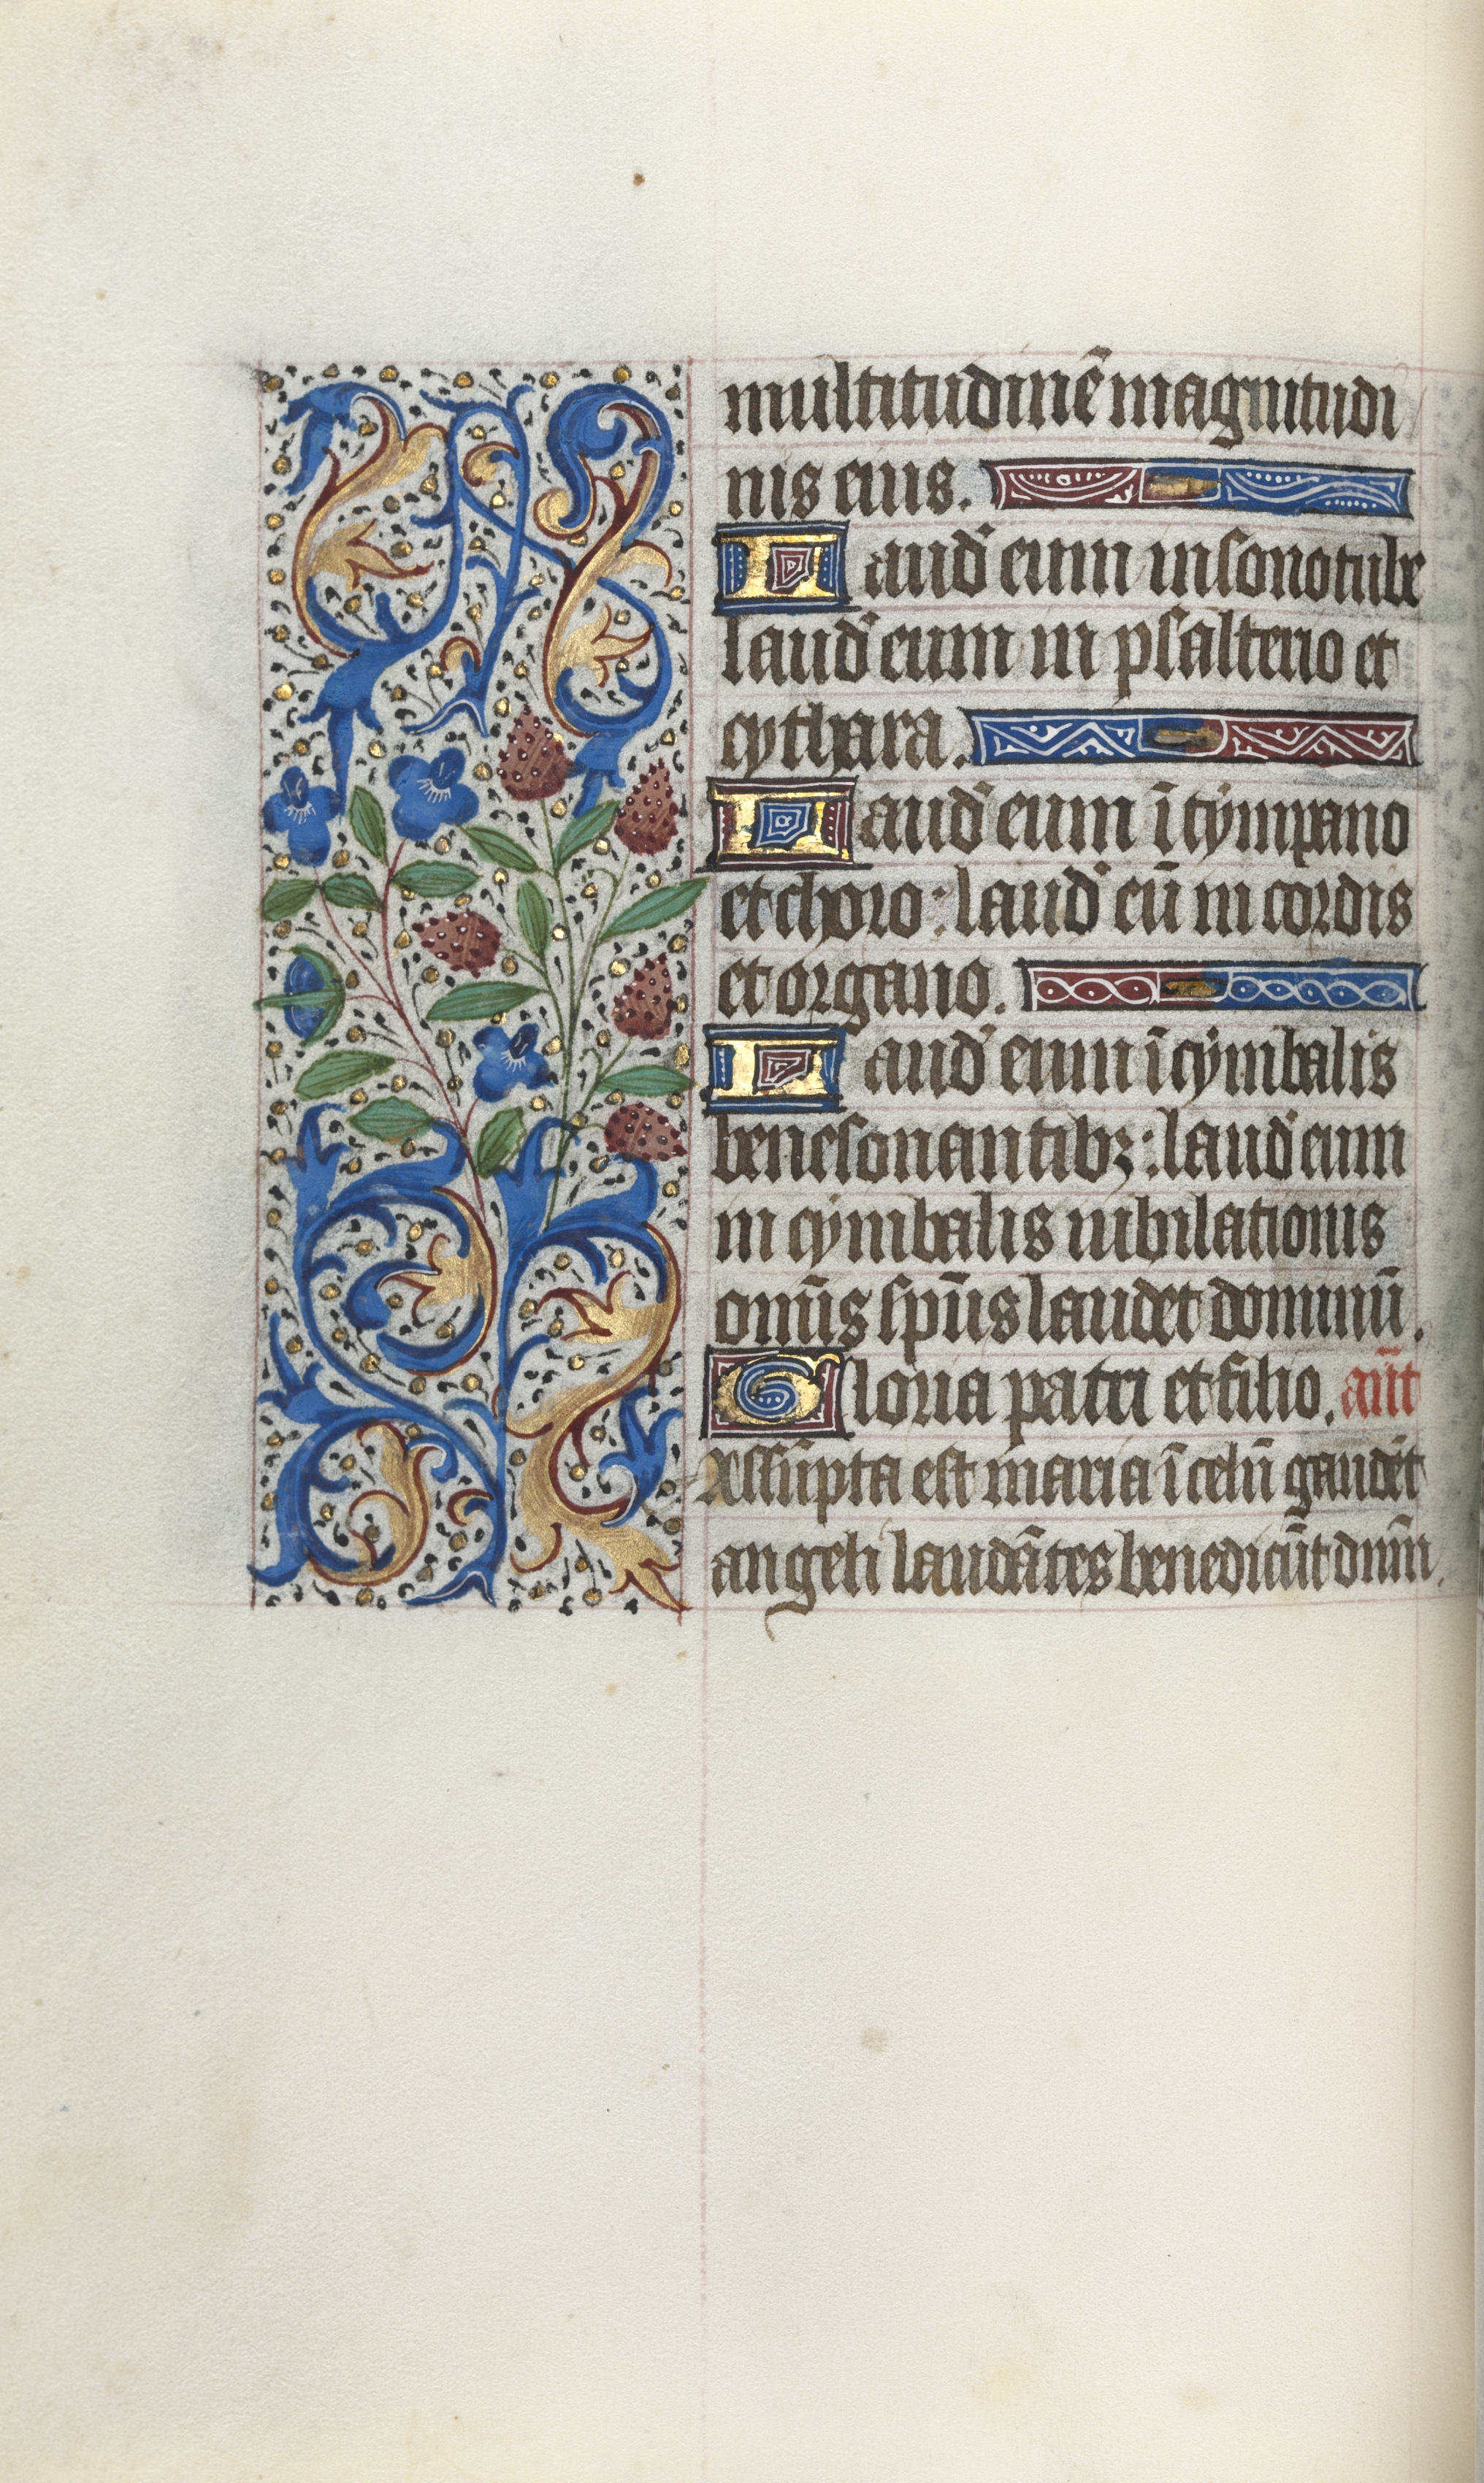 Book of Hours (Use of Rouen): fol. 46v